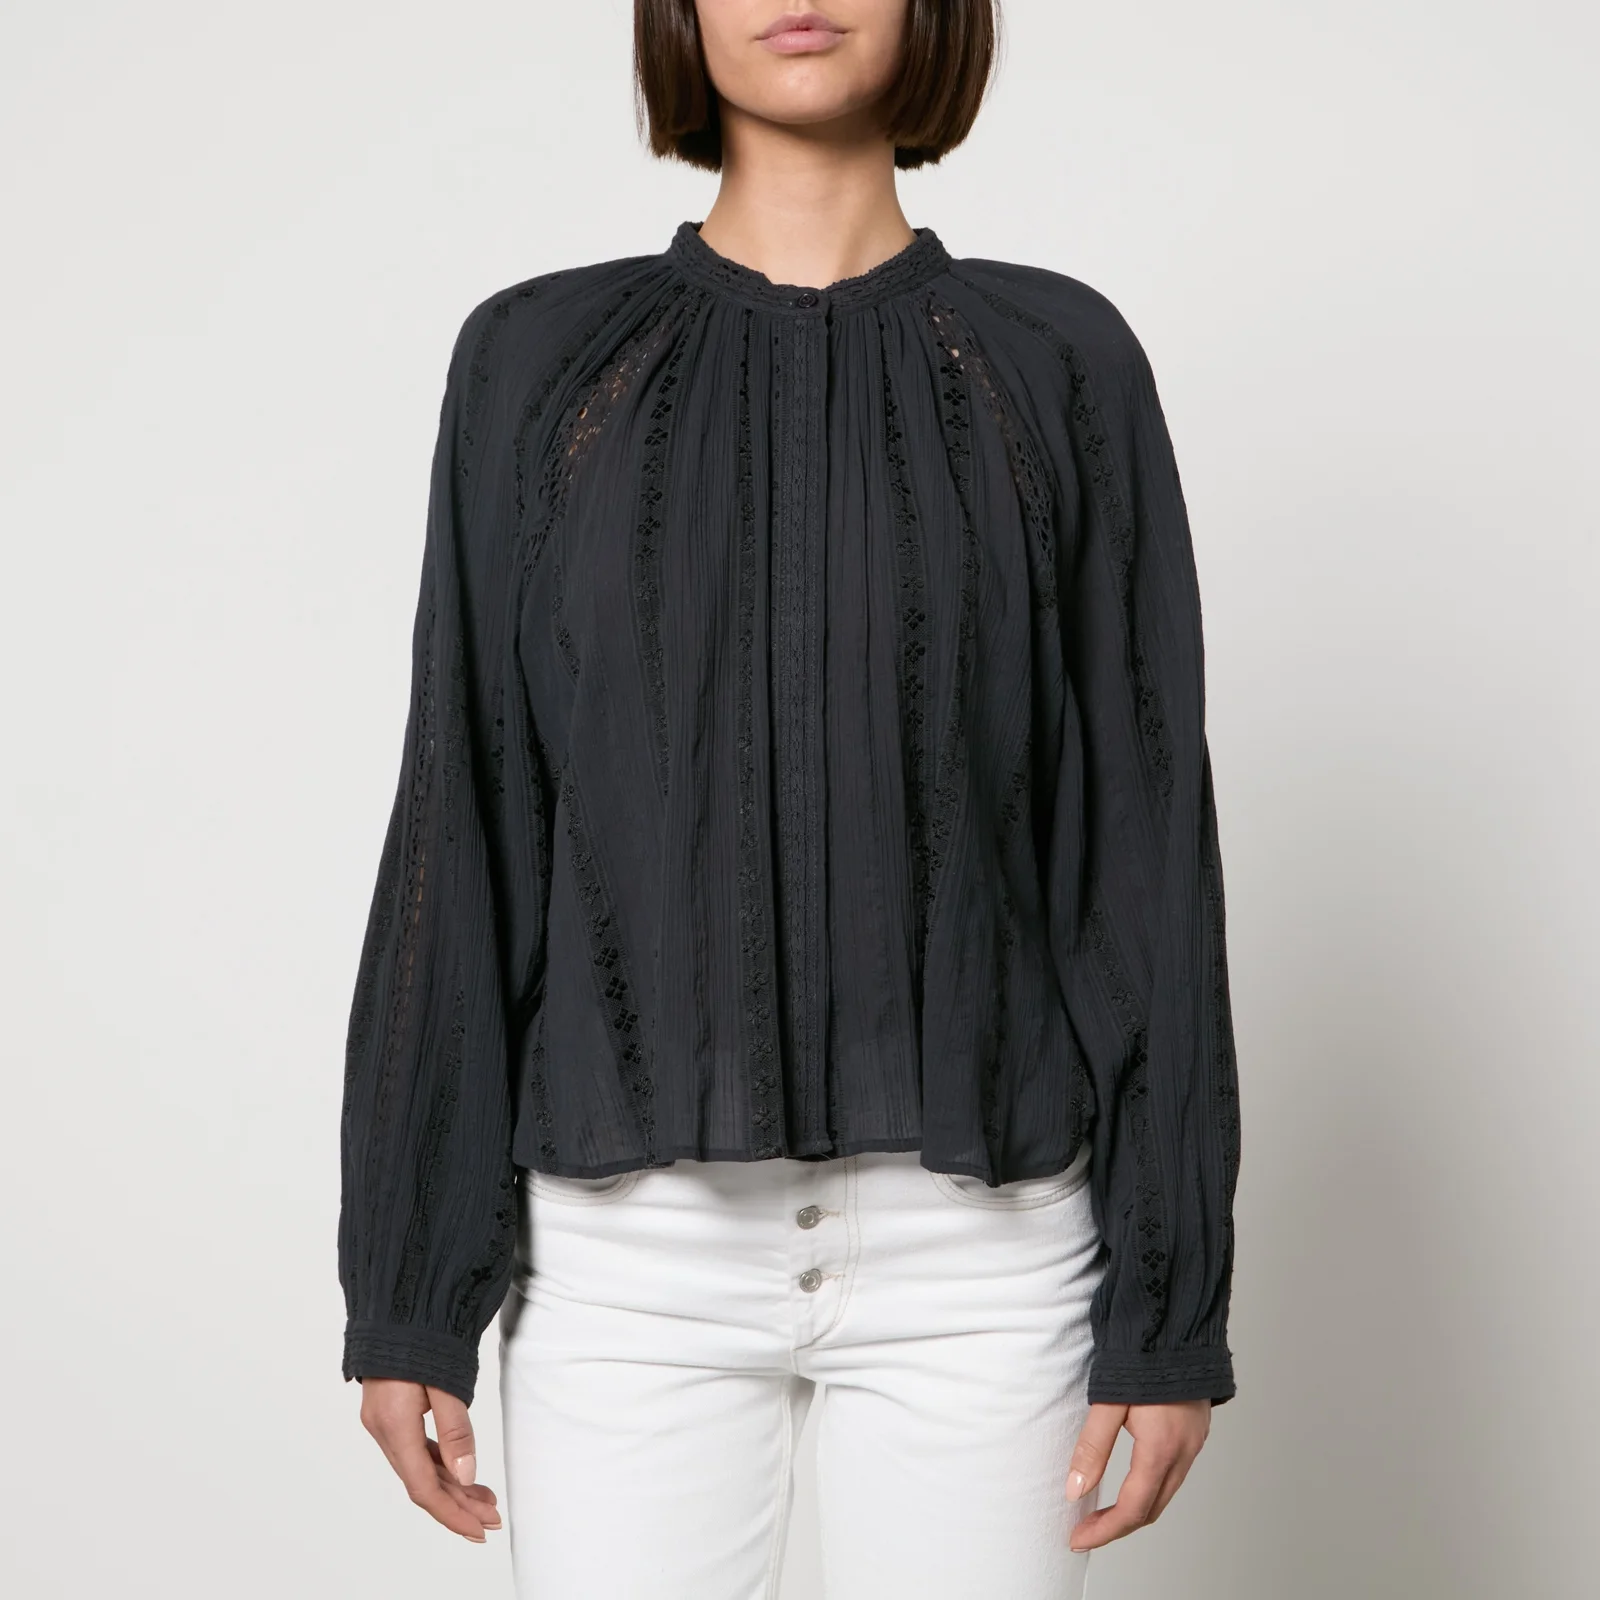 Marant Etoile Janelle Embroidered Broderie Anglaise Cotton Blouse - FR 34/UK 6 Image 1